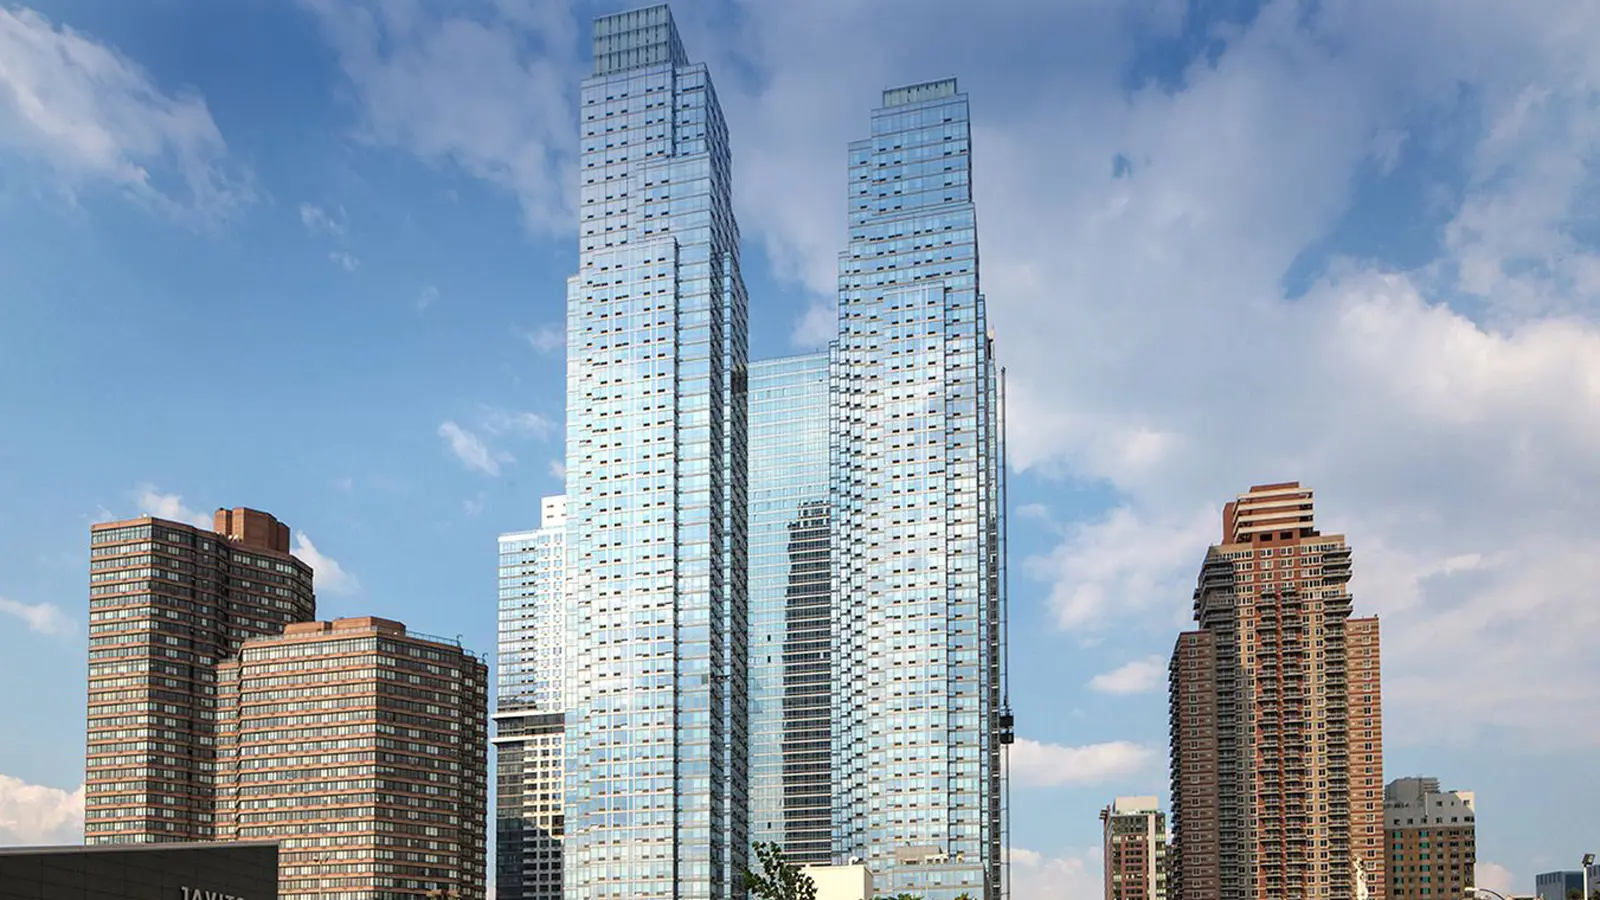 Silver Towers, 600 West 42nd Street